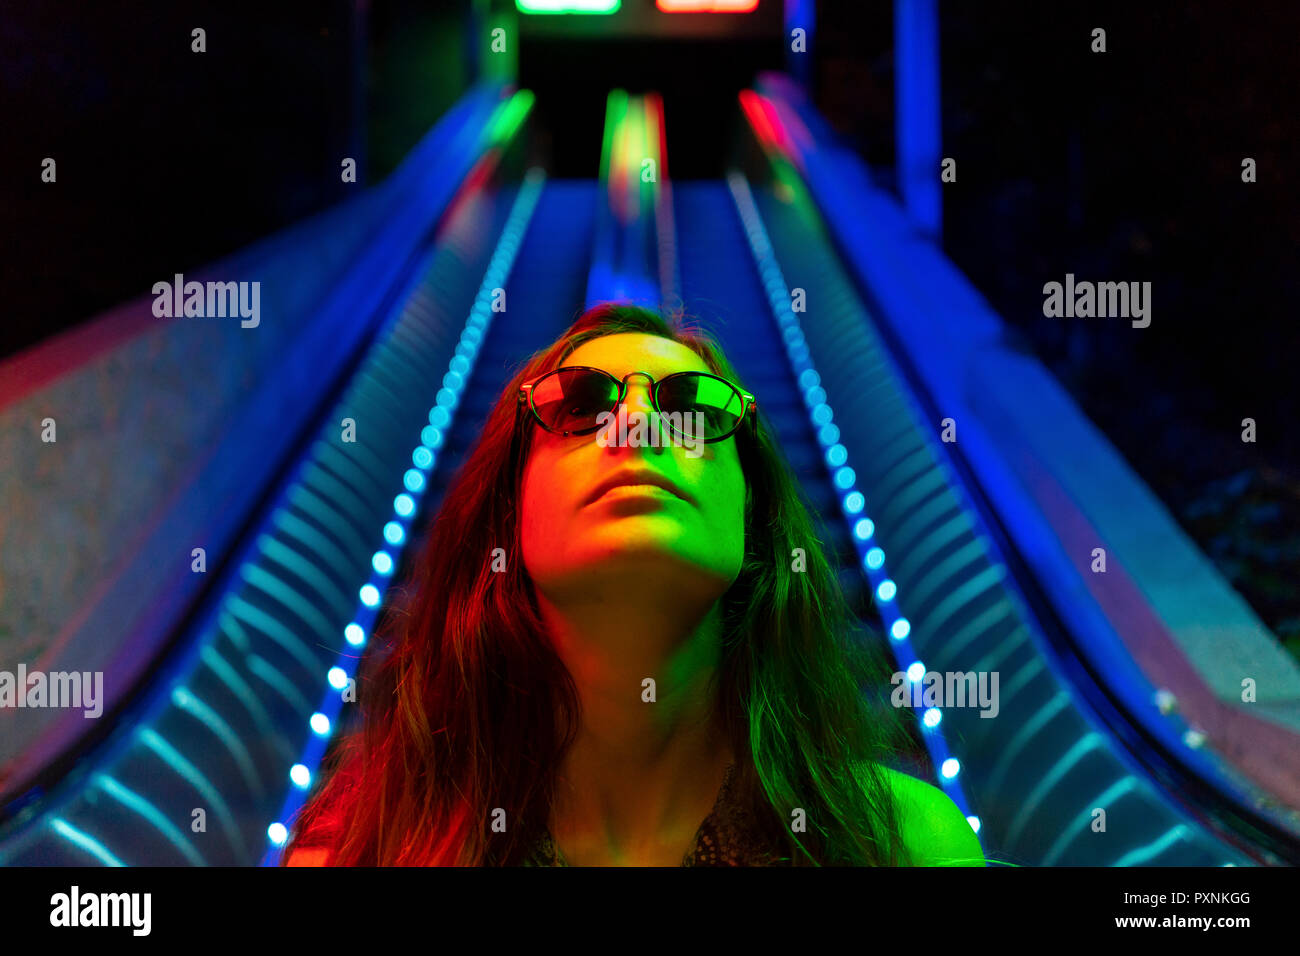 Portrait of illuminated young woman wearing sunglasses in front of blue lighted escalator Stock Photo